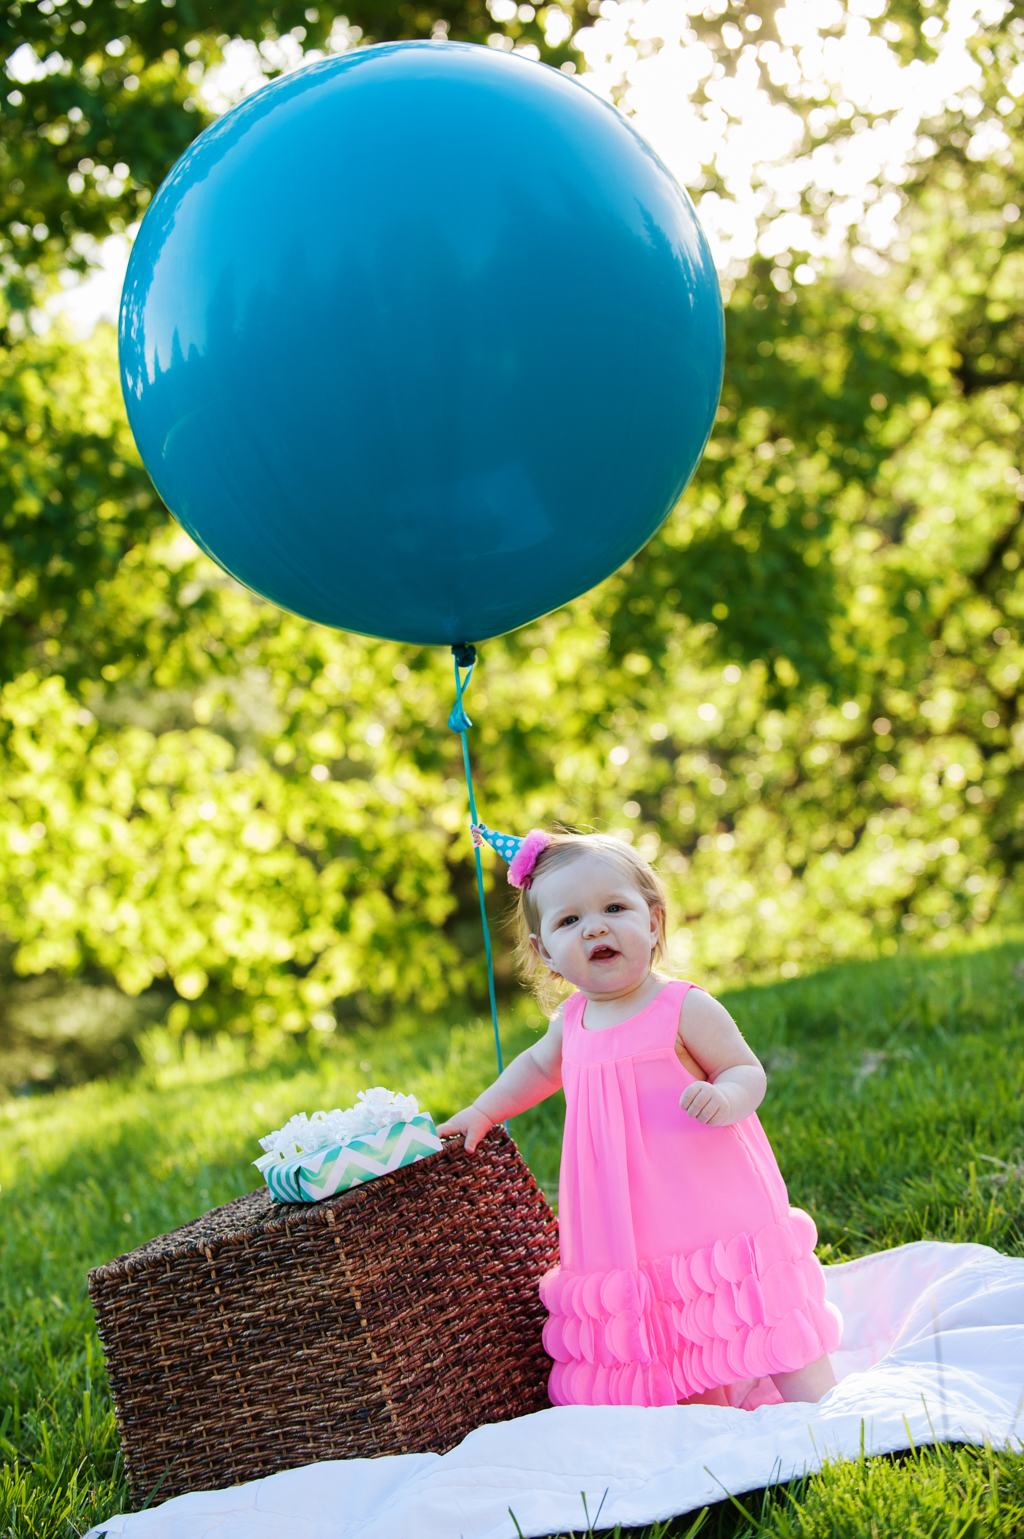 a baby girl wearing a hot pink dress stands in front of a birthday present and a giant blue balloon